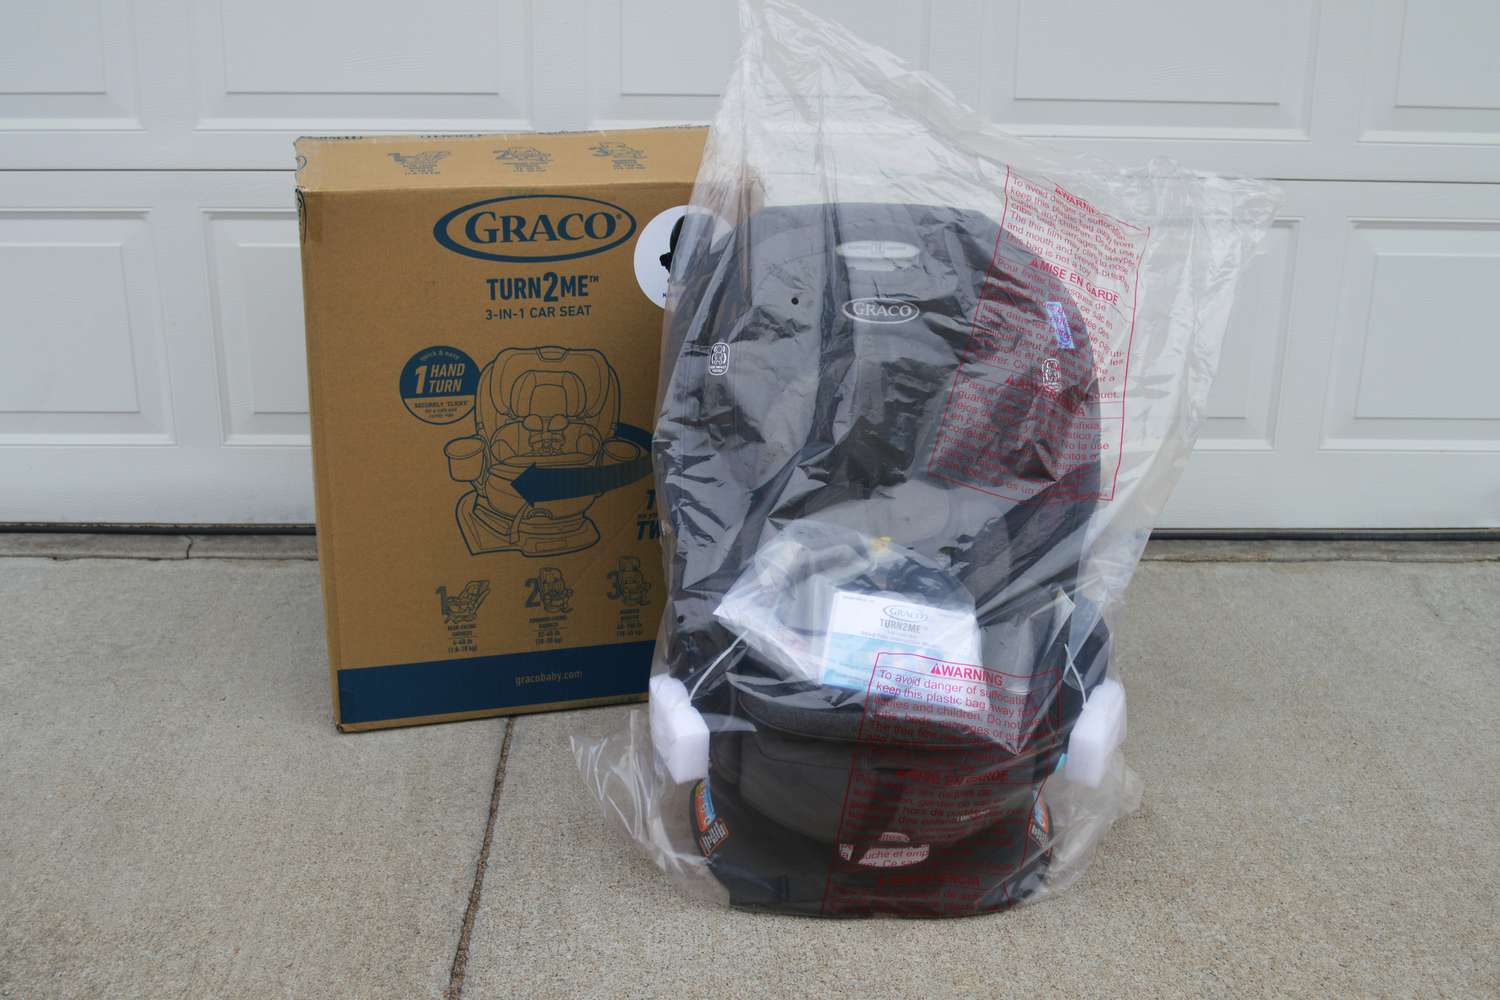 The Graco Turn2Me 3-in-1 Rotating Convertible Car Seat straight out of its packaging